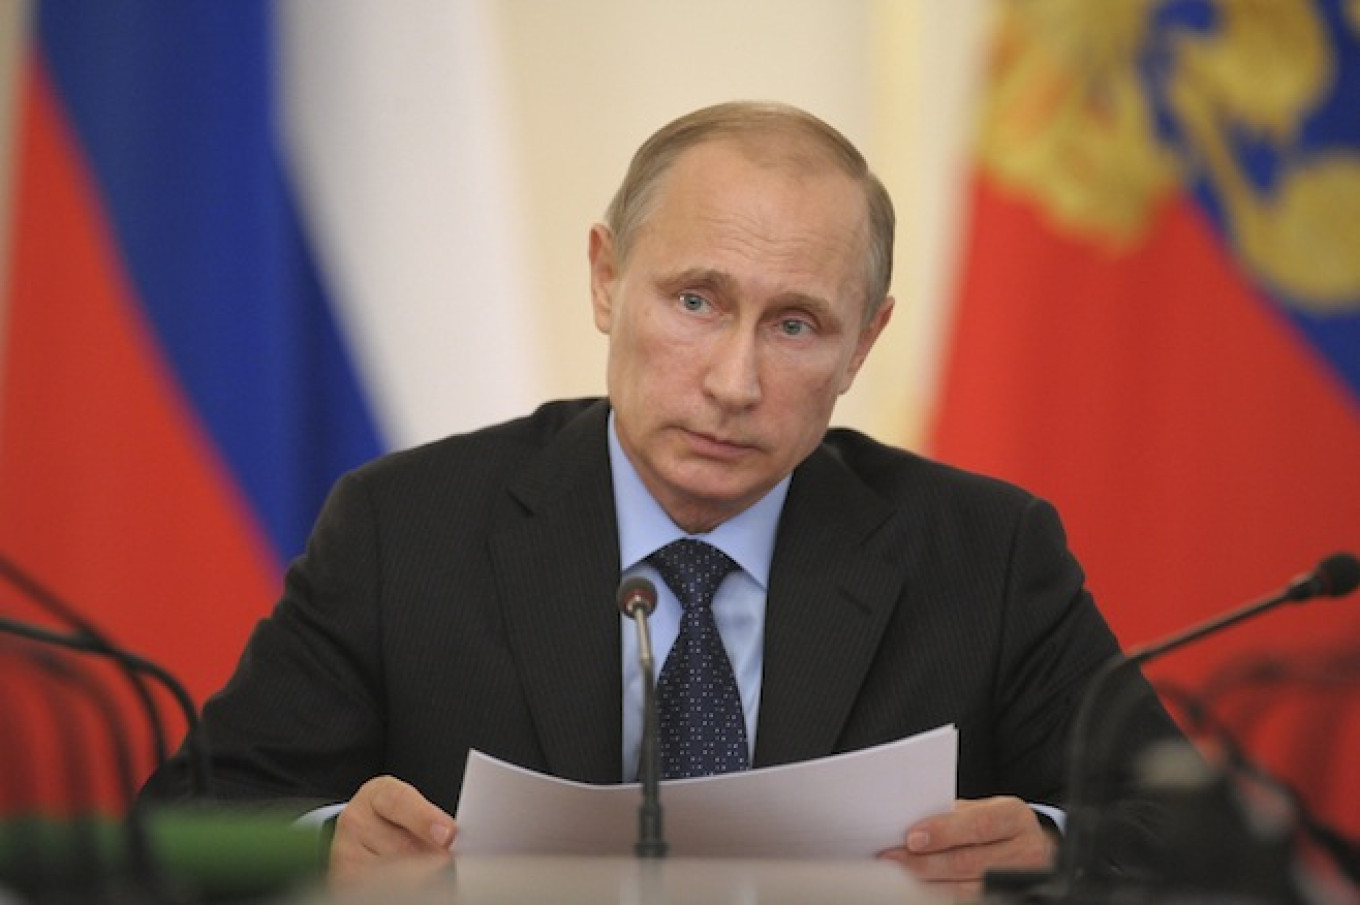 Putin Signs Law Giving Prison Terms For Internet Extremism 